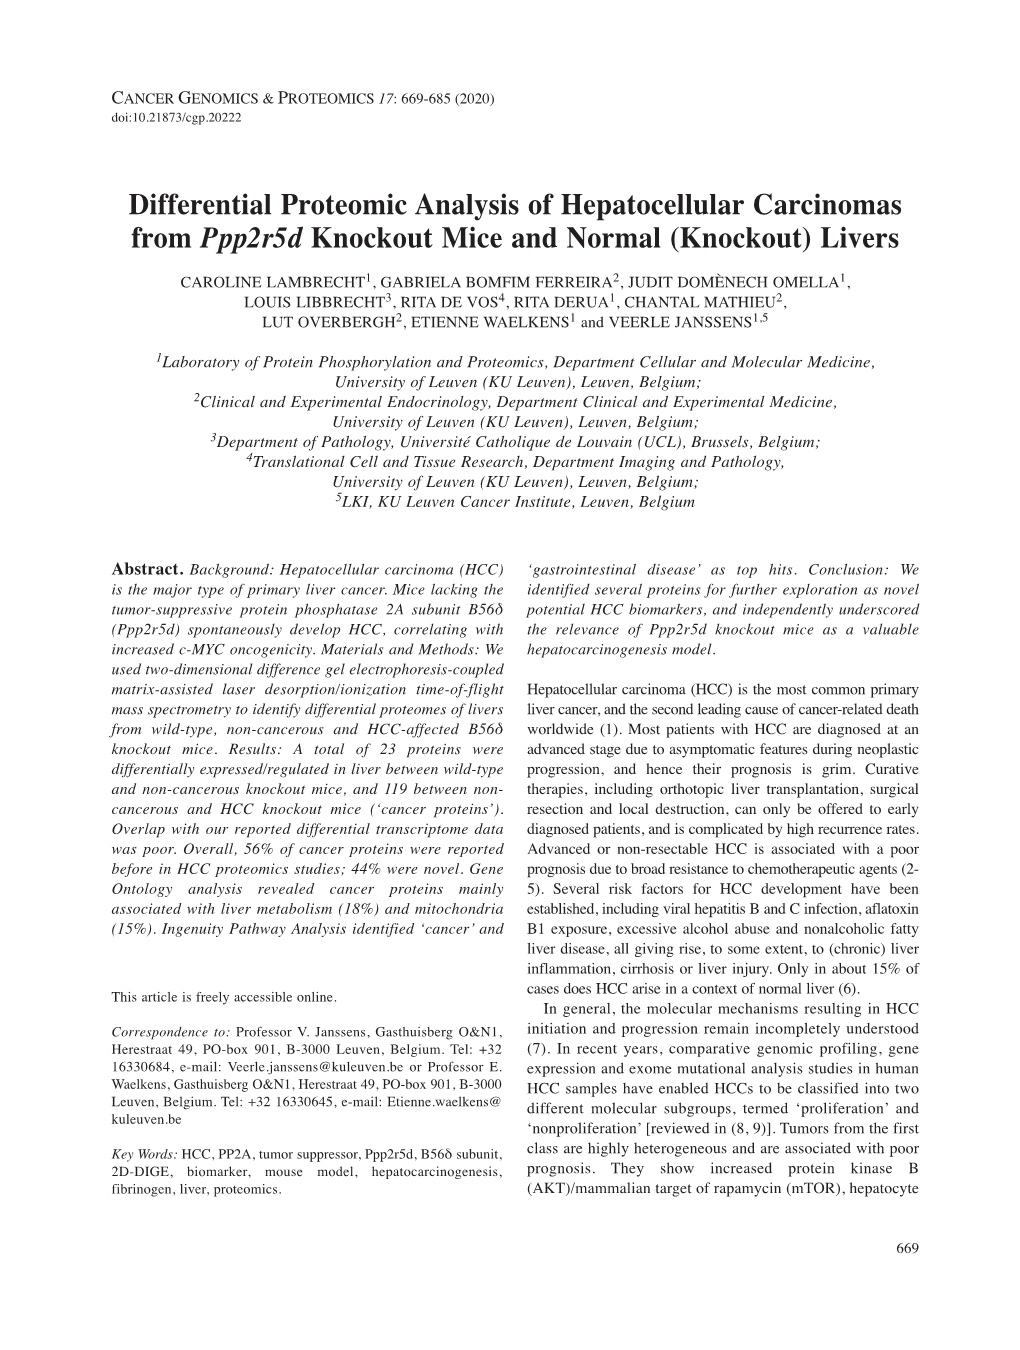 Differential Proteomic Analysis of Hepatocellular Carcinomas From